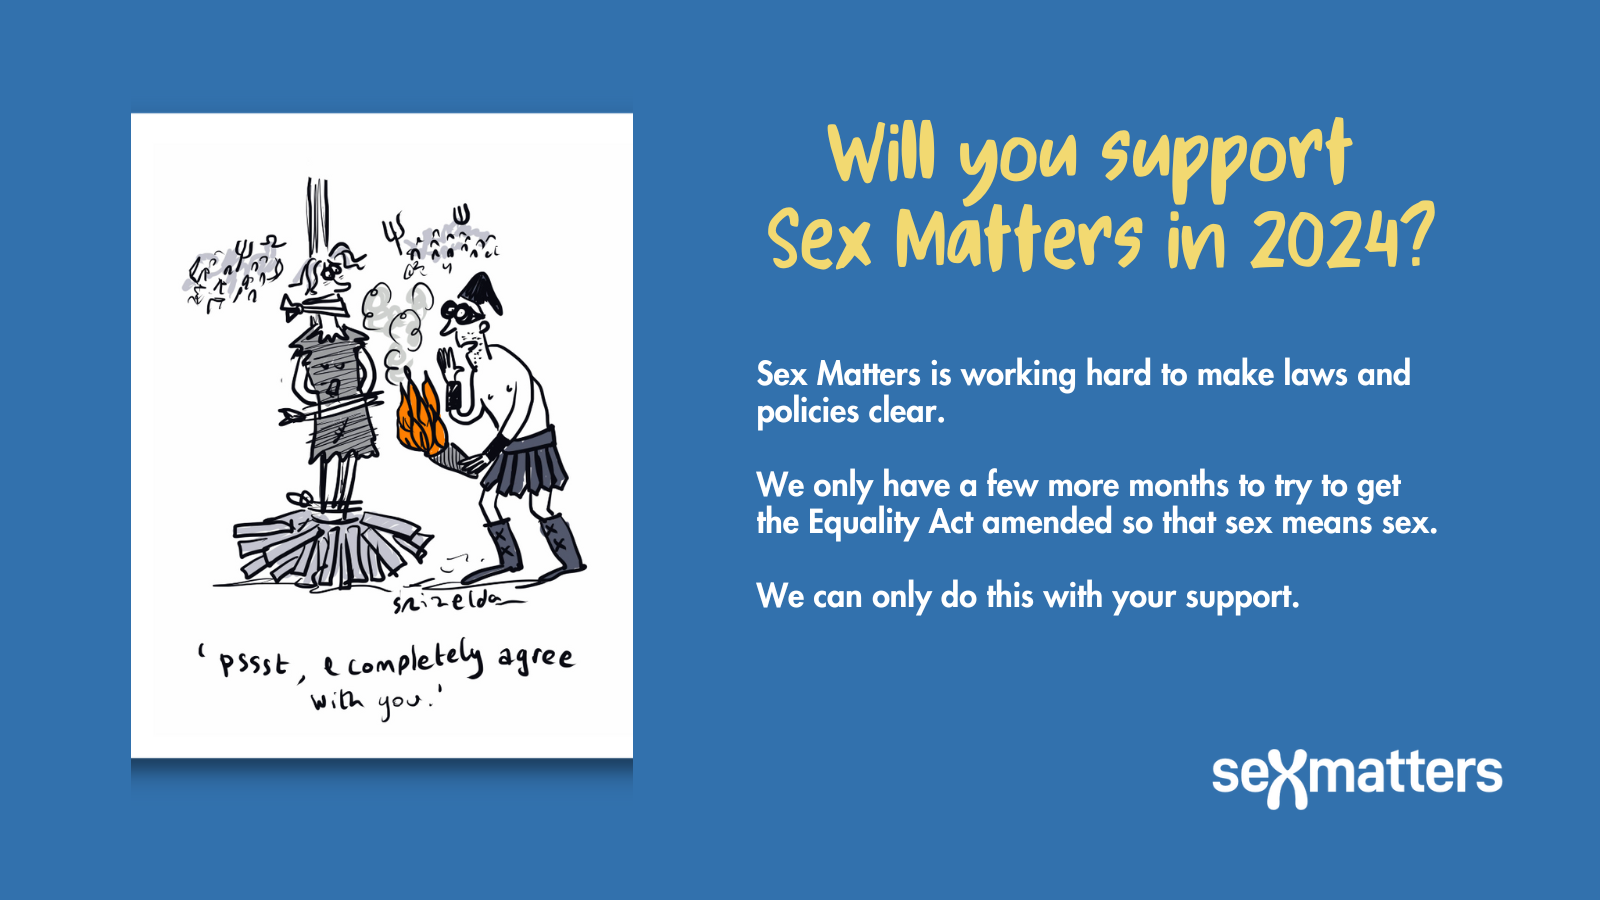 Will you support Sex Matters in 2024? Sex Matters is working hard to make laws and policies clear. We only have a few more months to try to get the Equality Act amended so that sex means sex. We can only do this with your support.